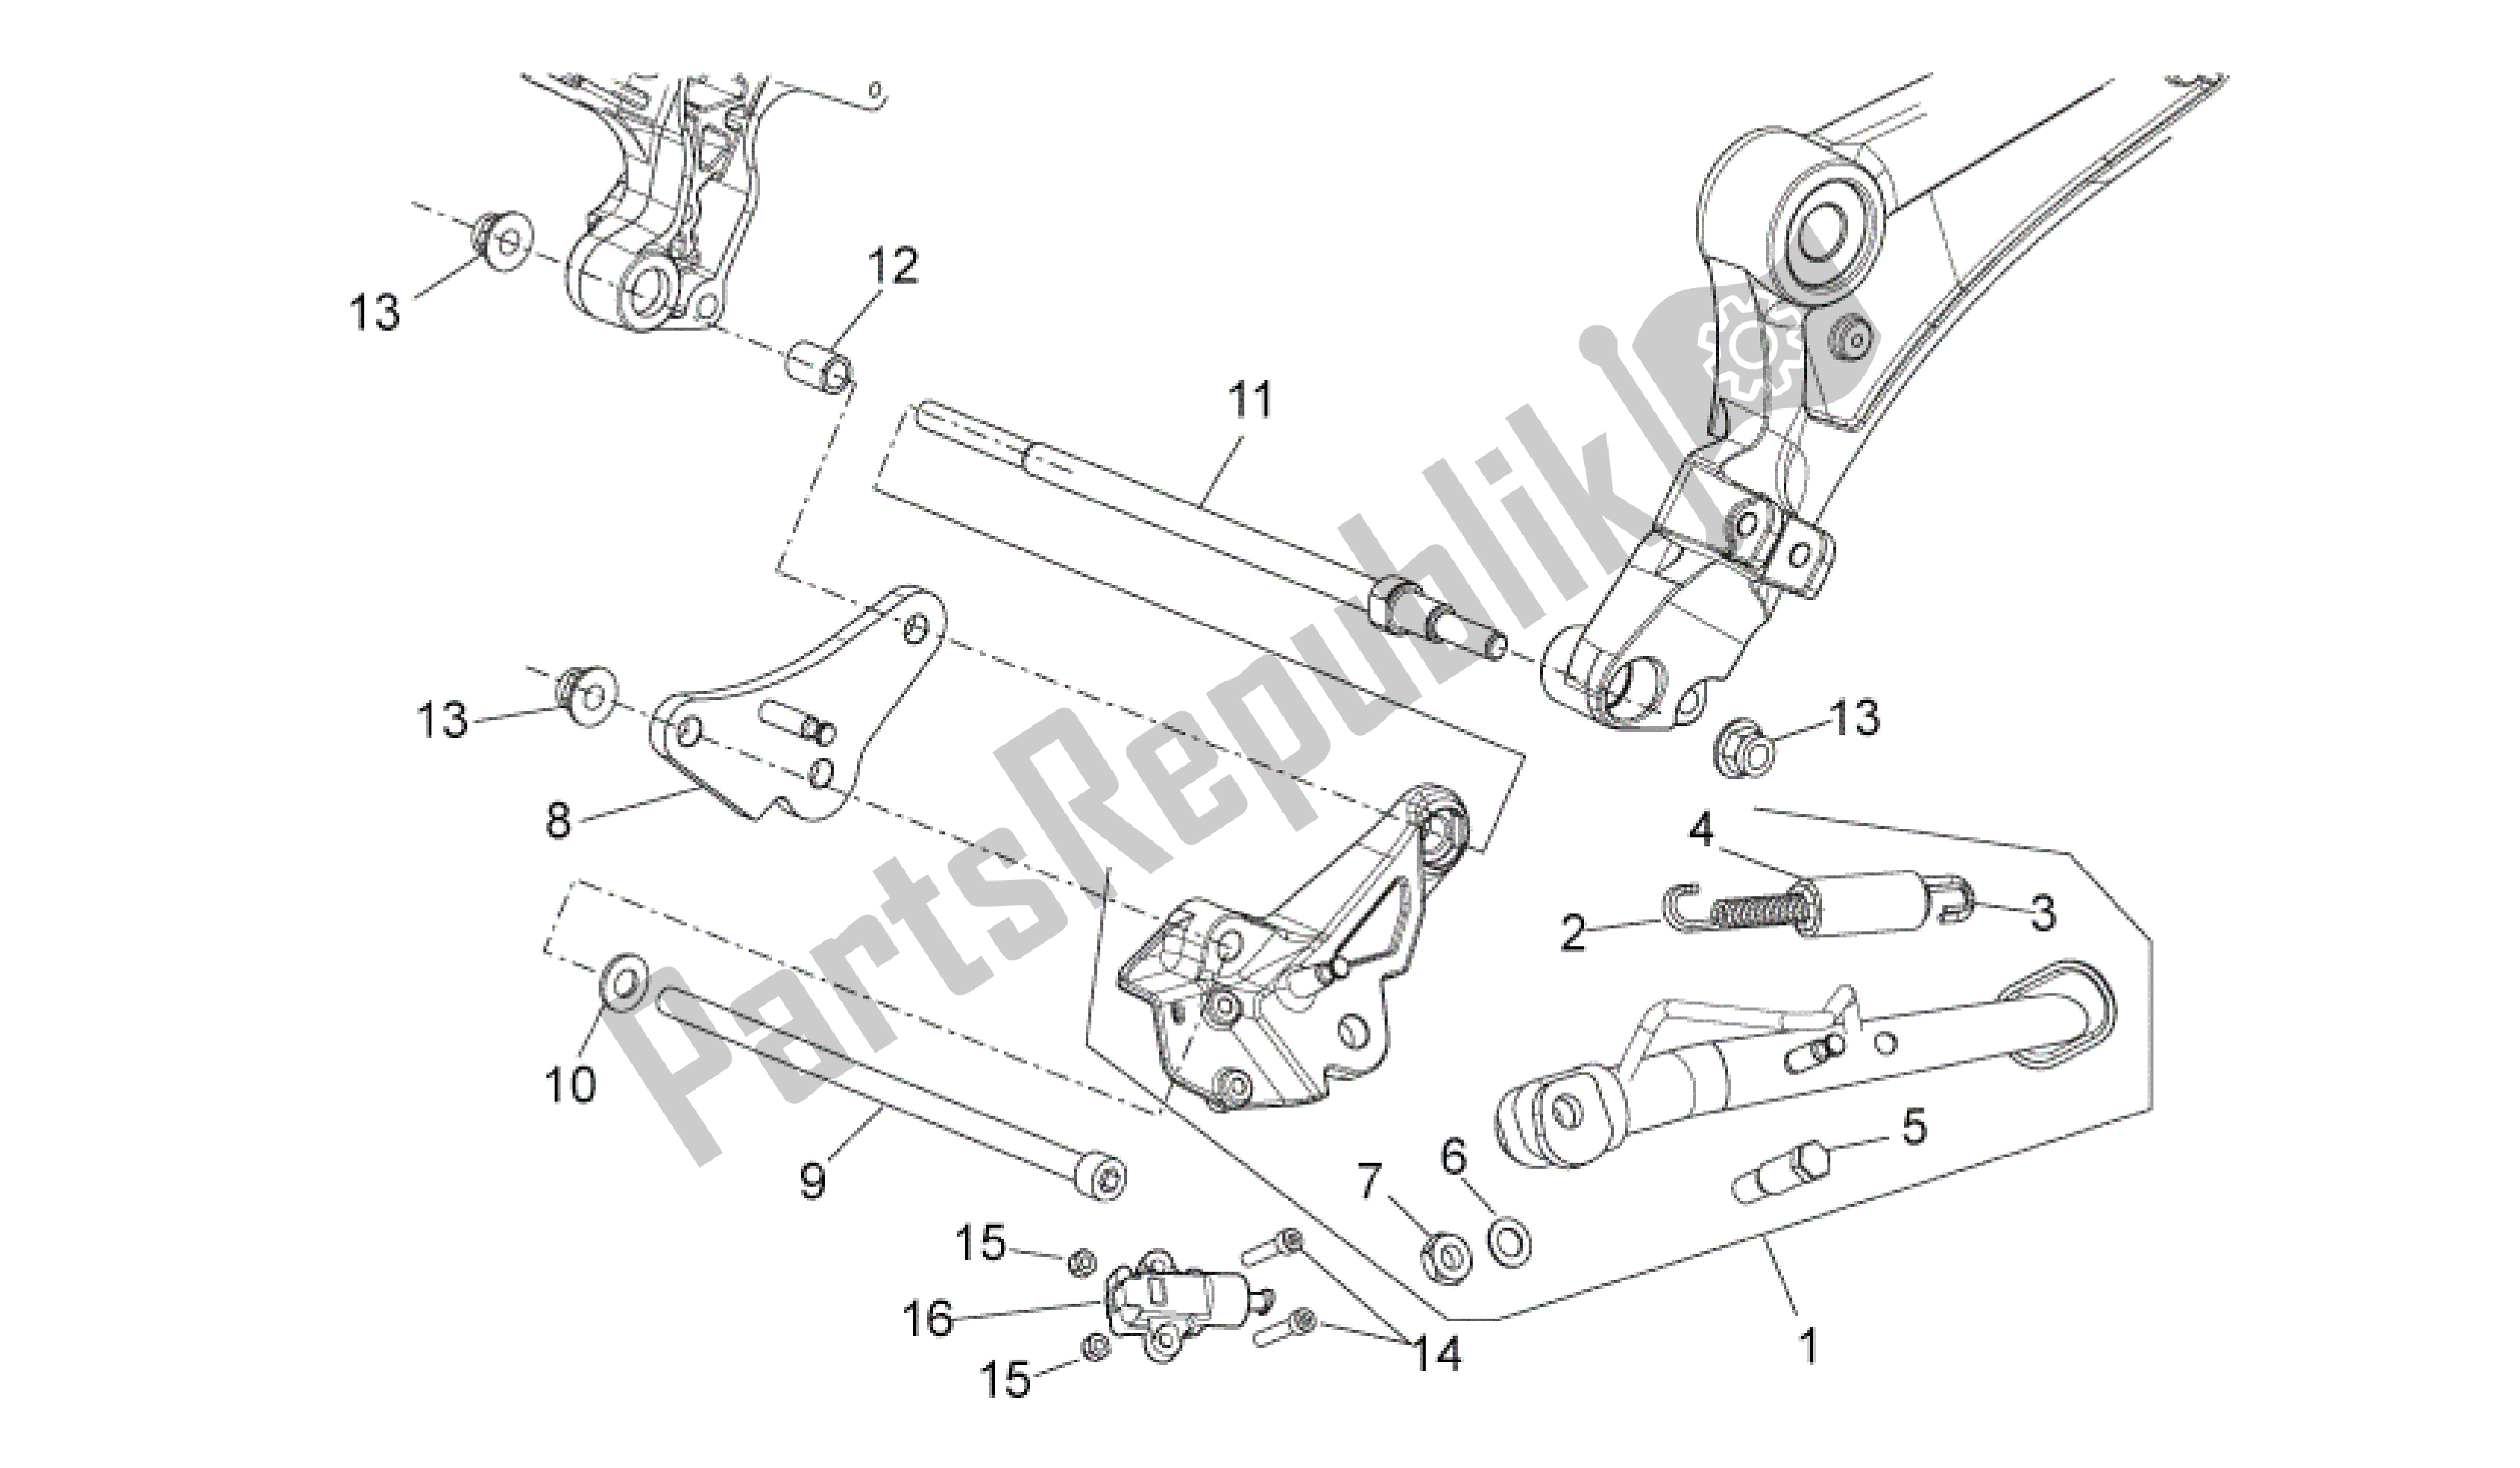 All parts for the Central Stand of the Aprilia Mana 850 2009 - 2011